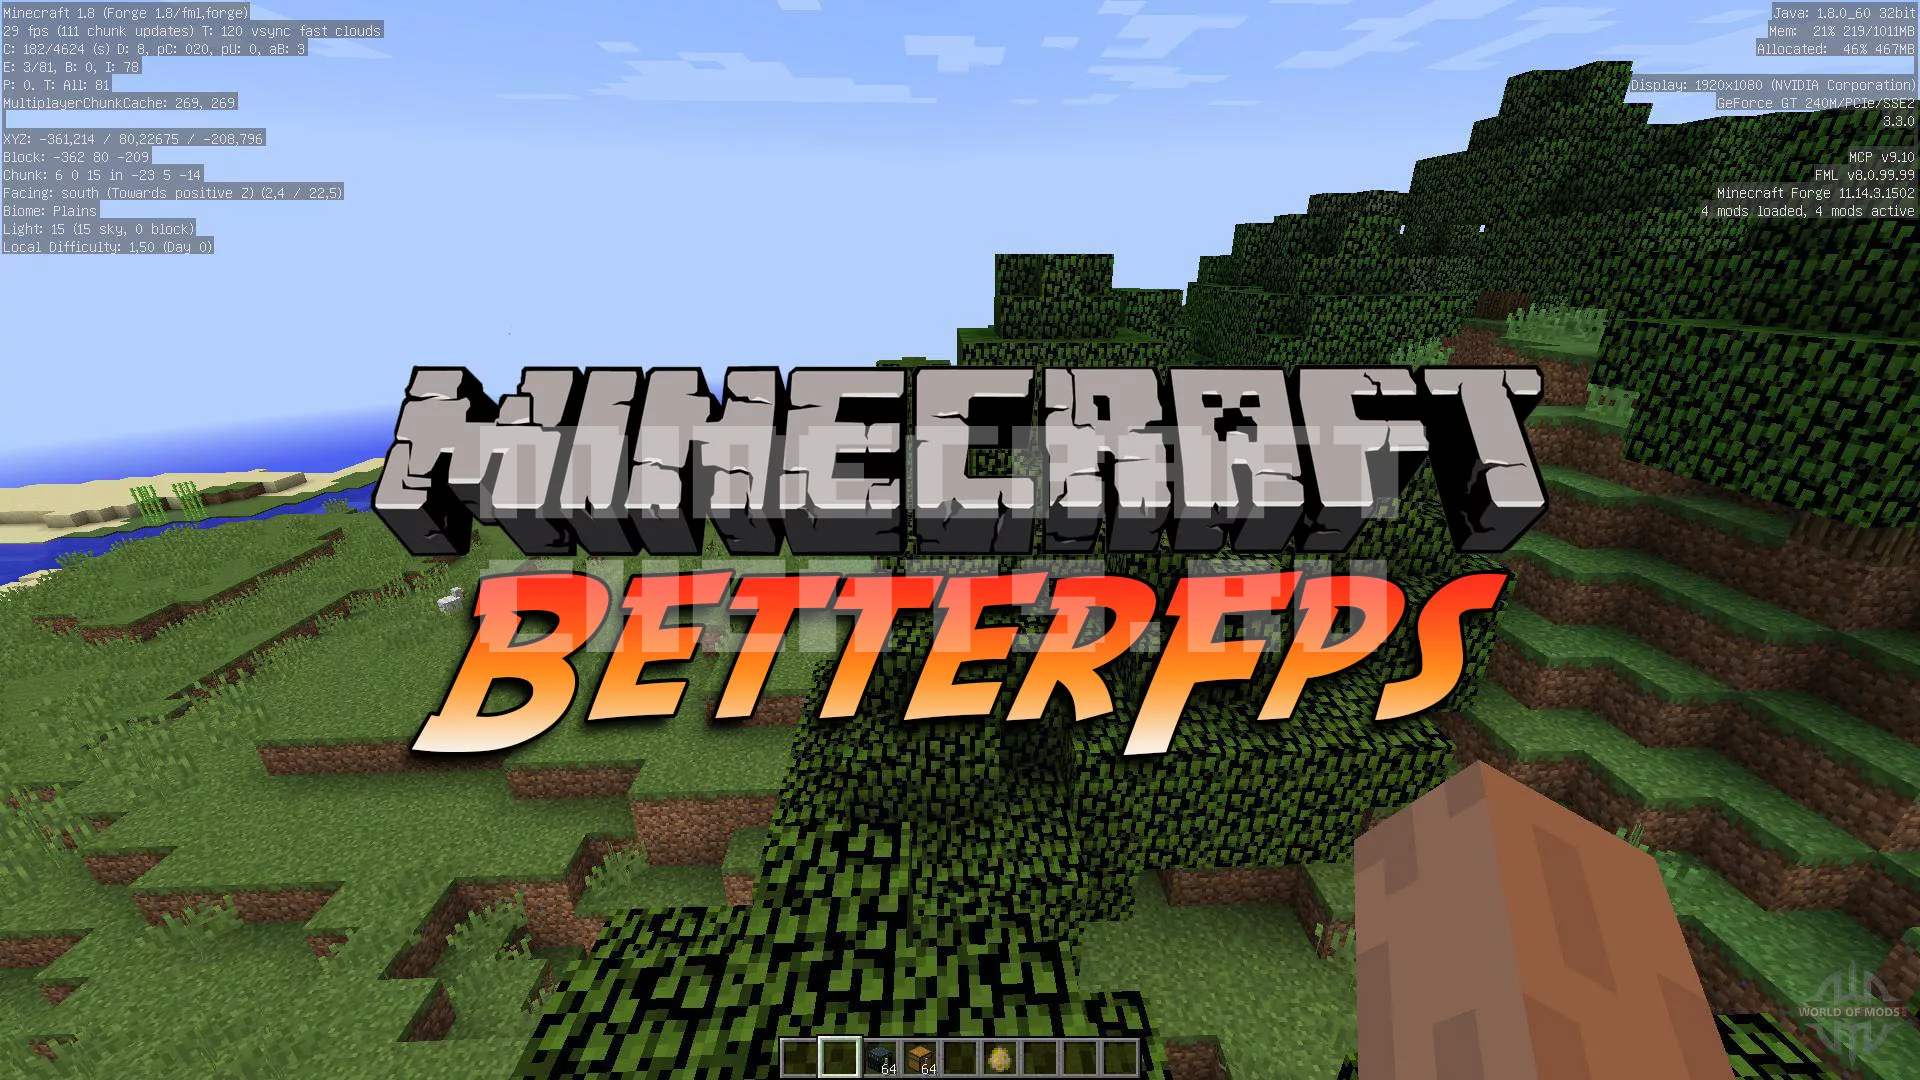 How To increase Fps in Minecraft With Cheats